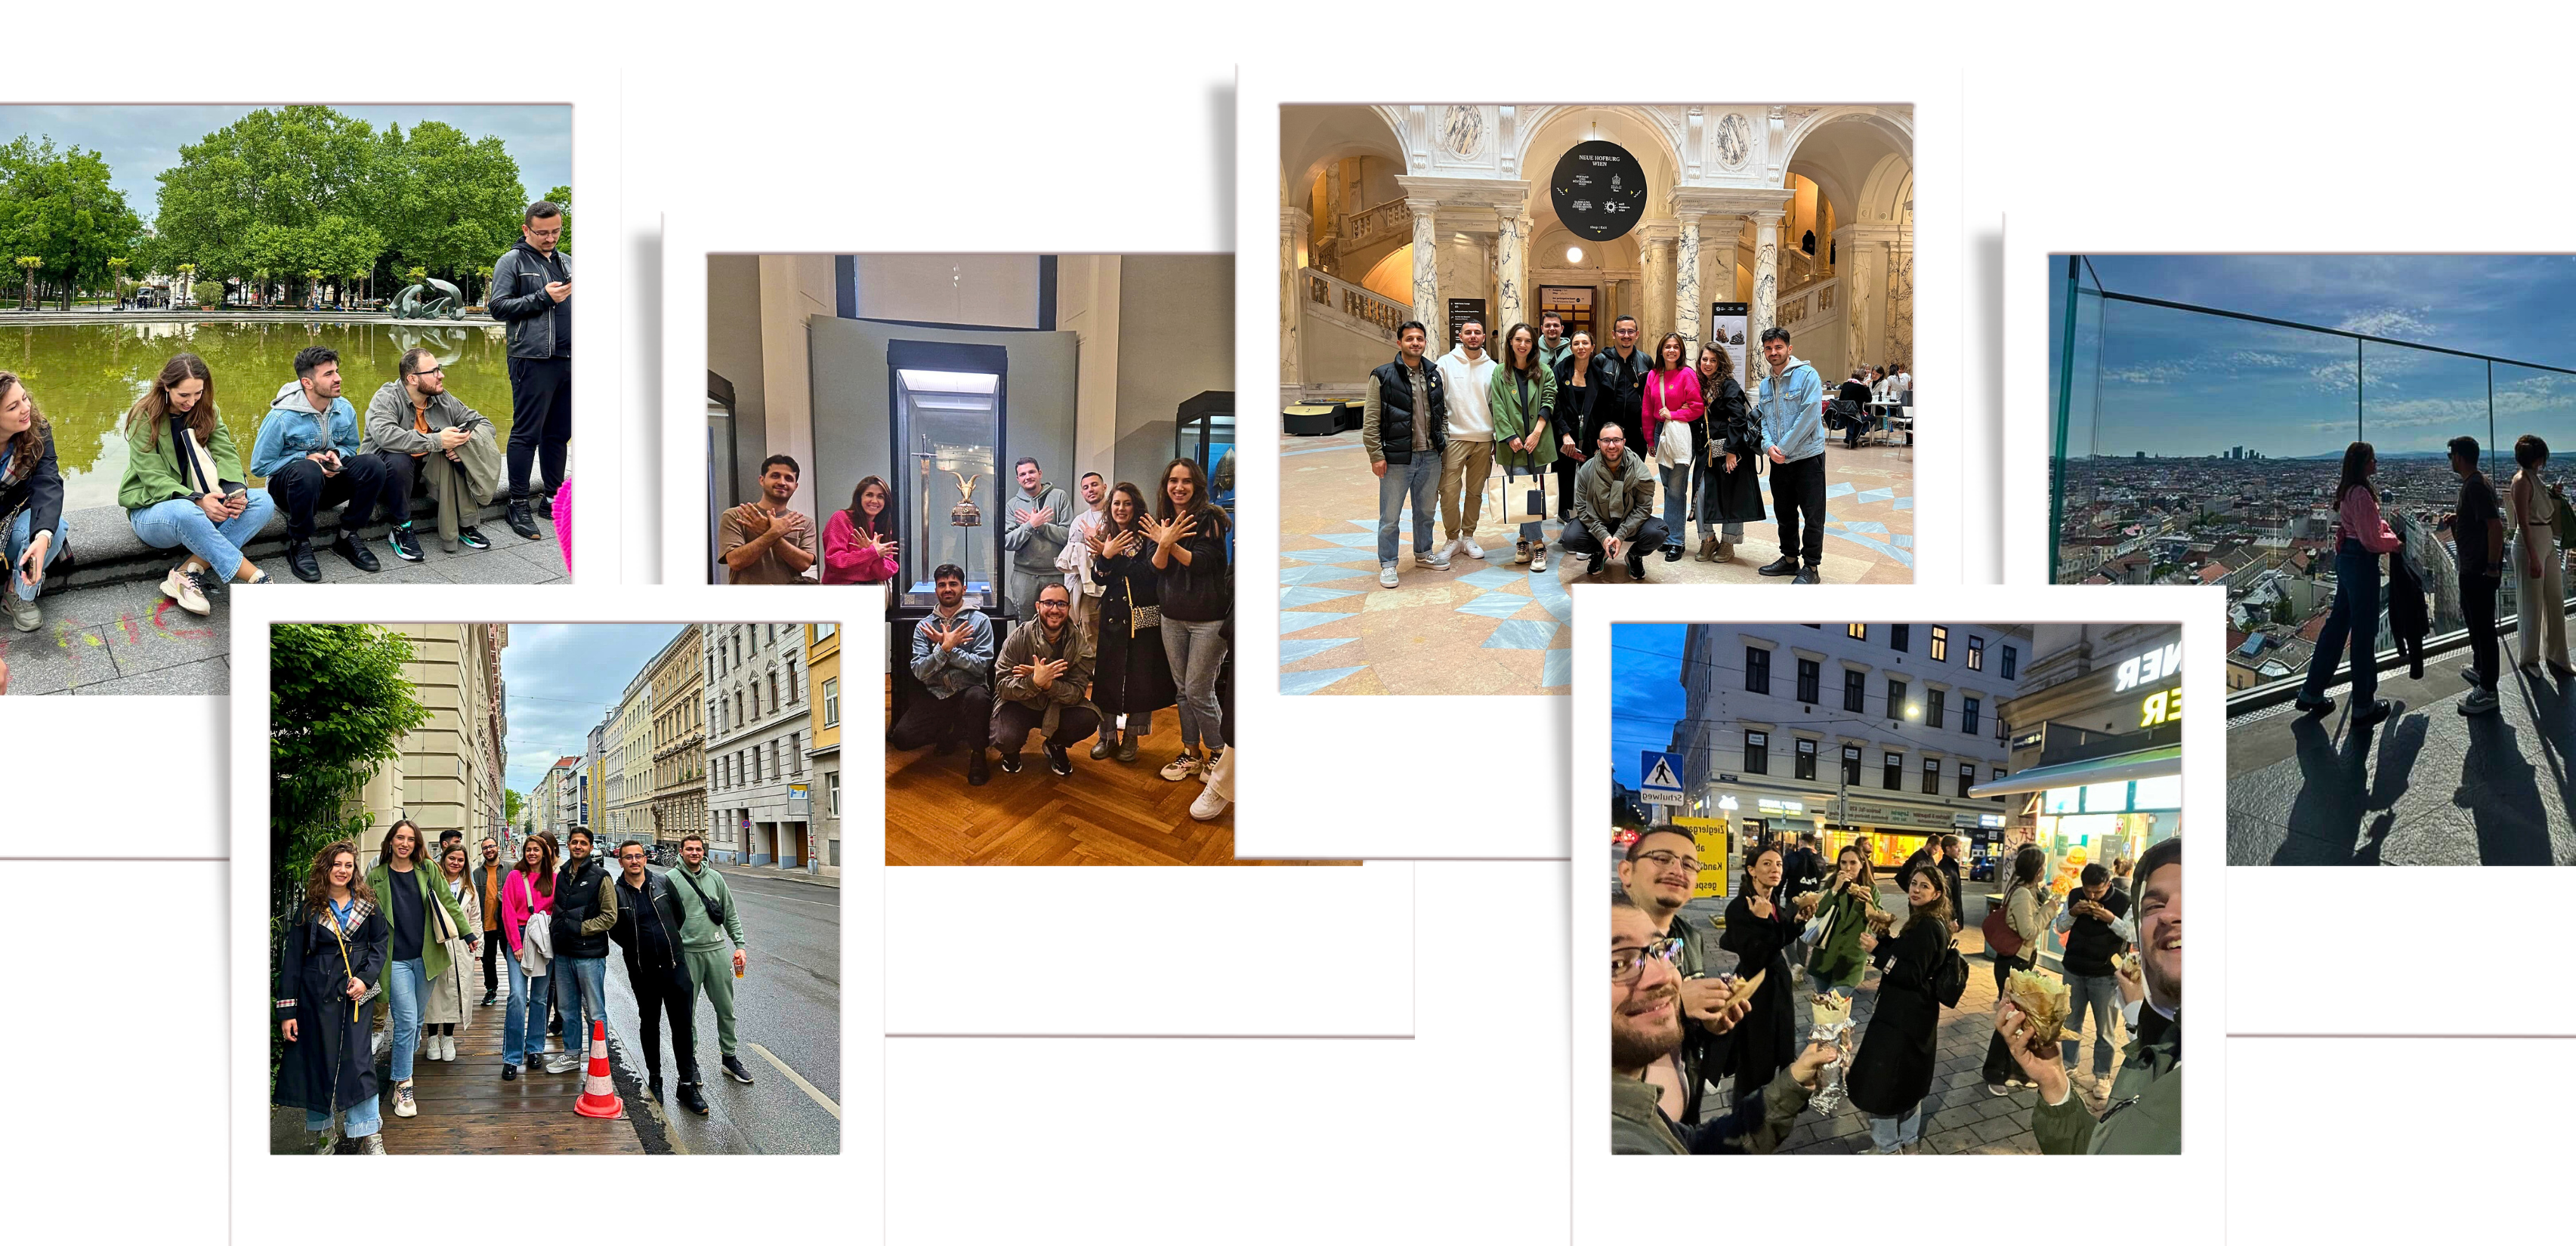 StarLabs and Digital School reward long term employees with a dream trip to Vienna!